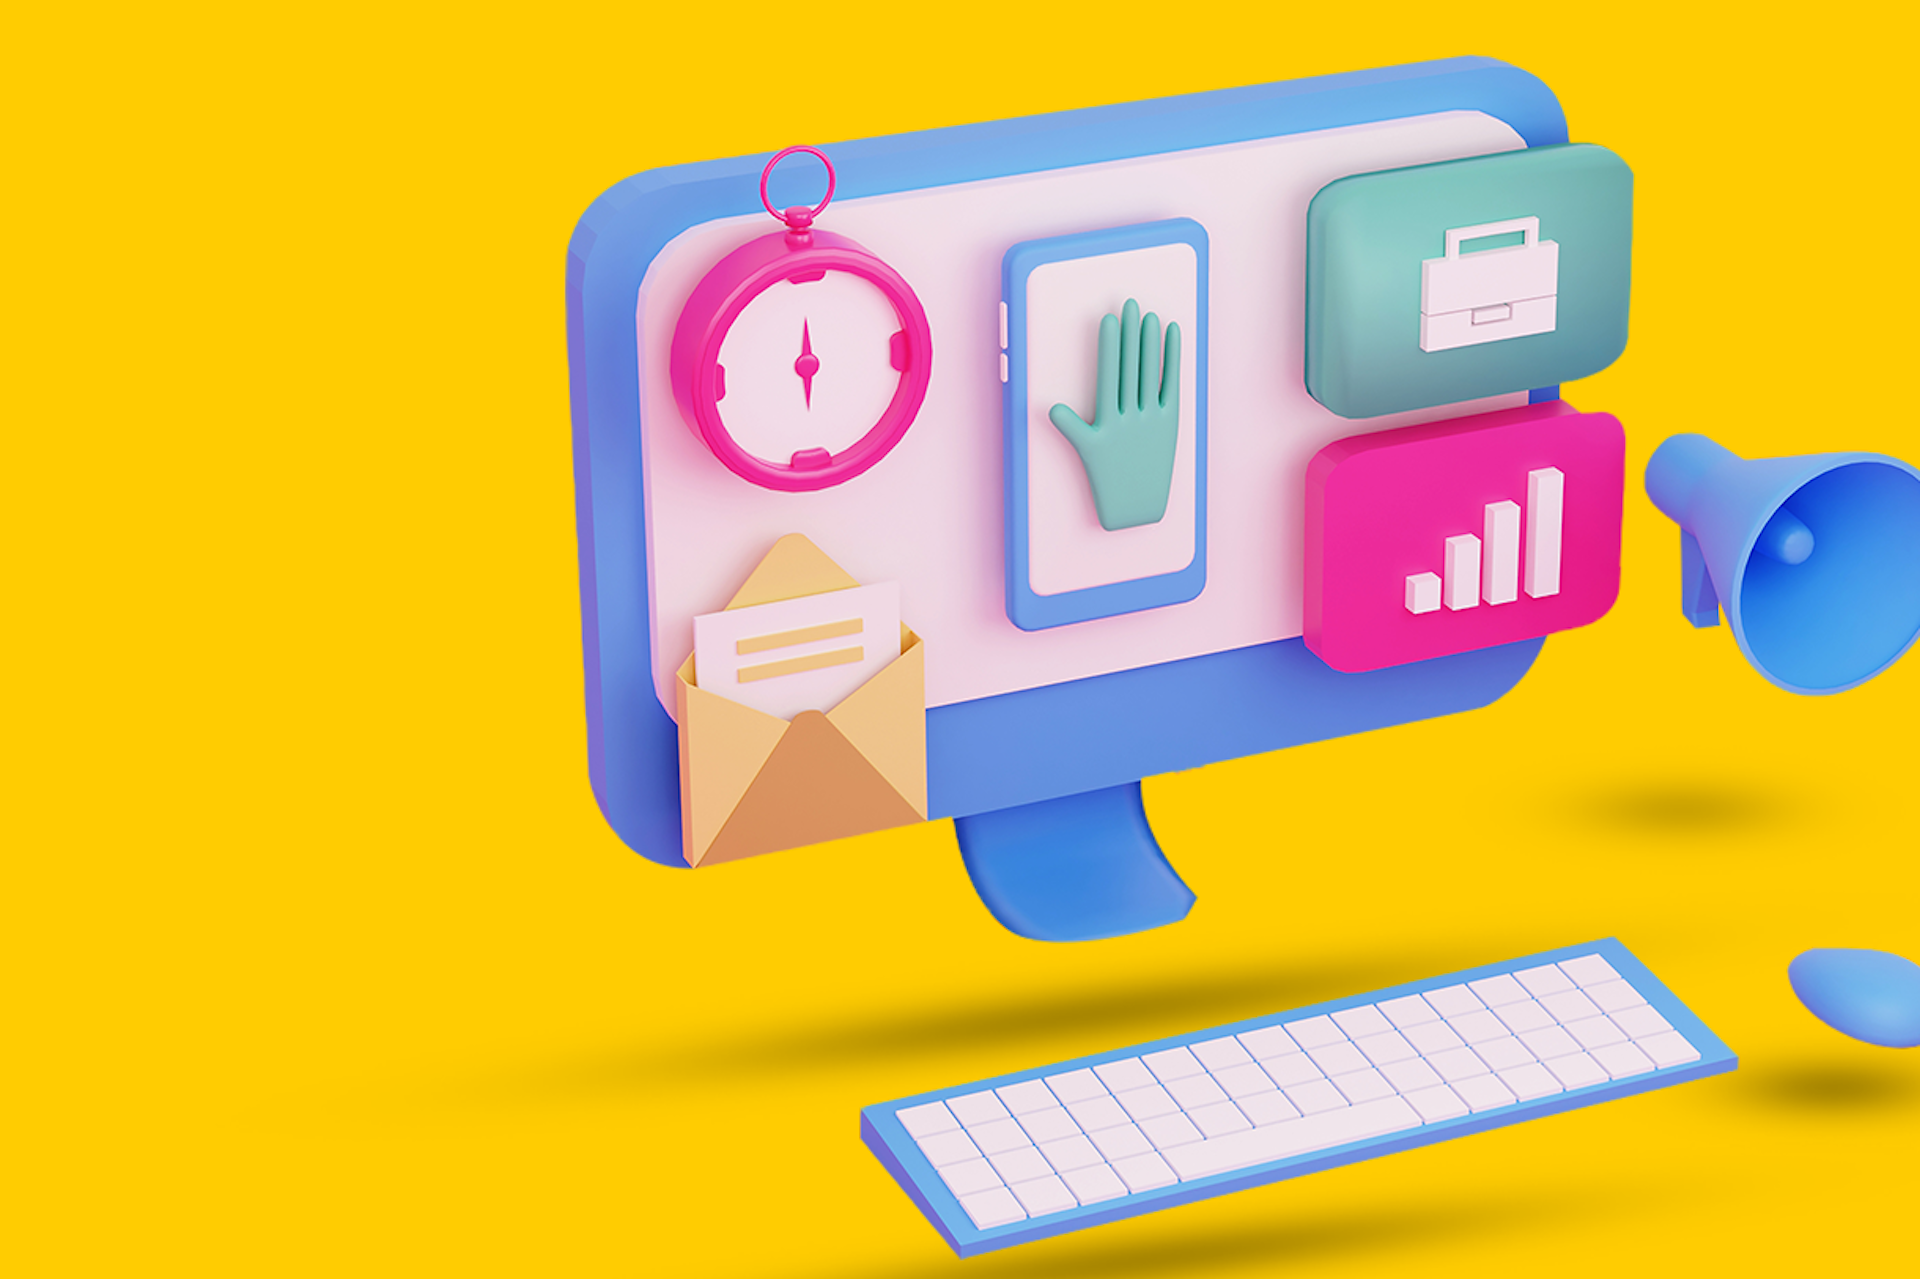 Illustration showing a stylized desktop computer with several icons and tools such as an analytics graph, smartphone, clock, and email. Blog post on top marketing tools and software